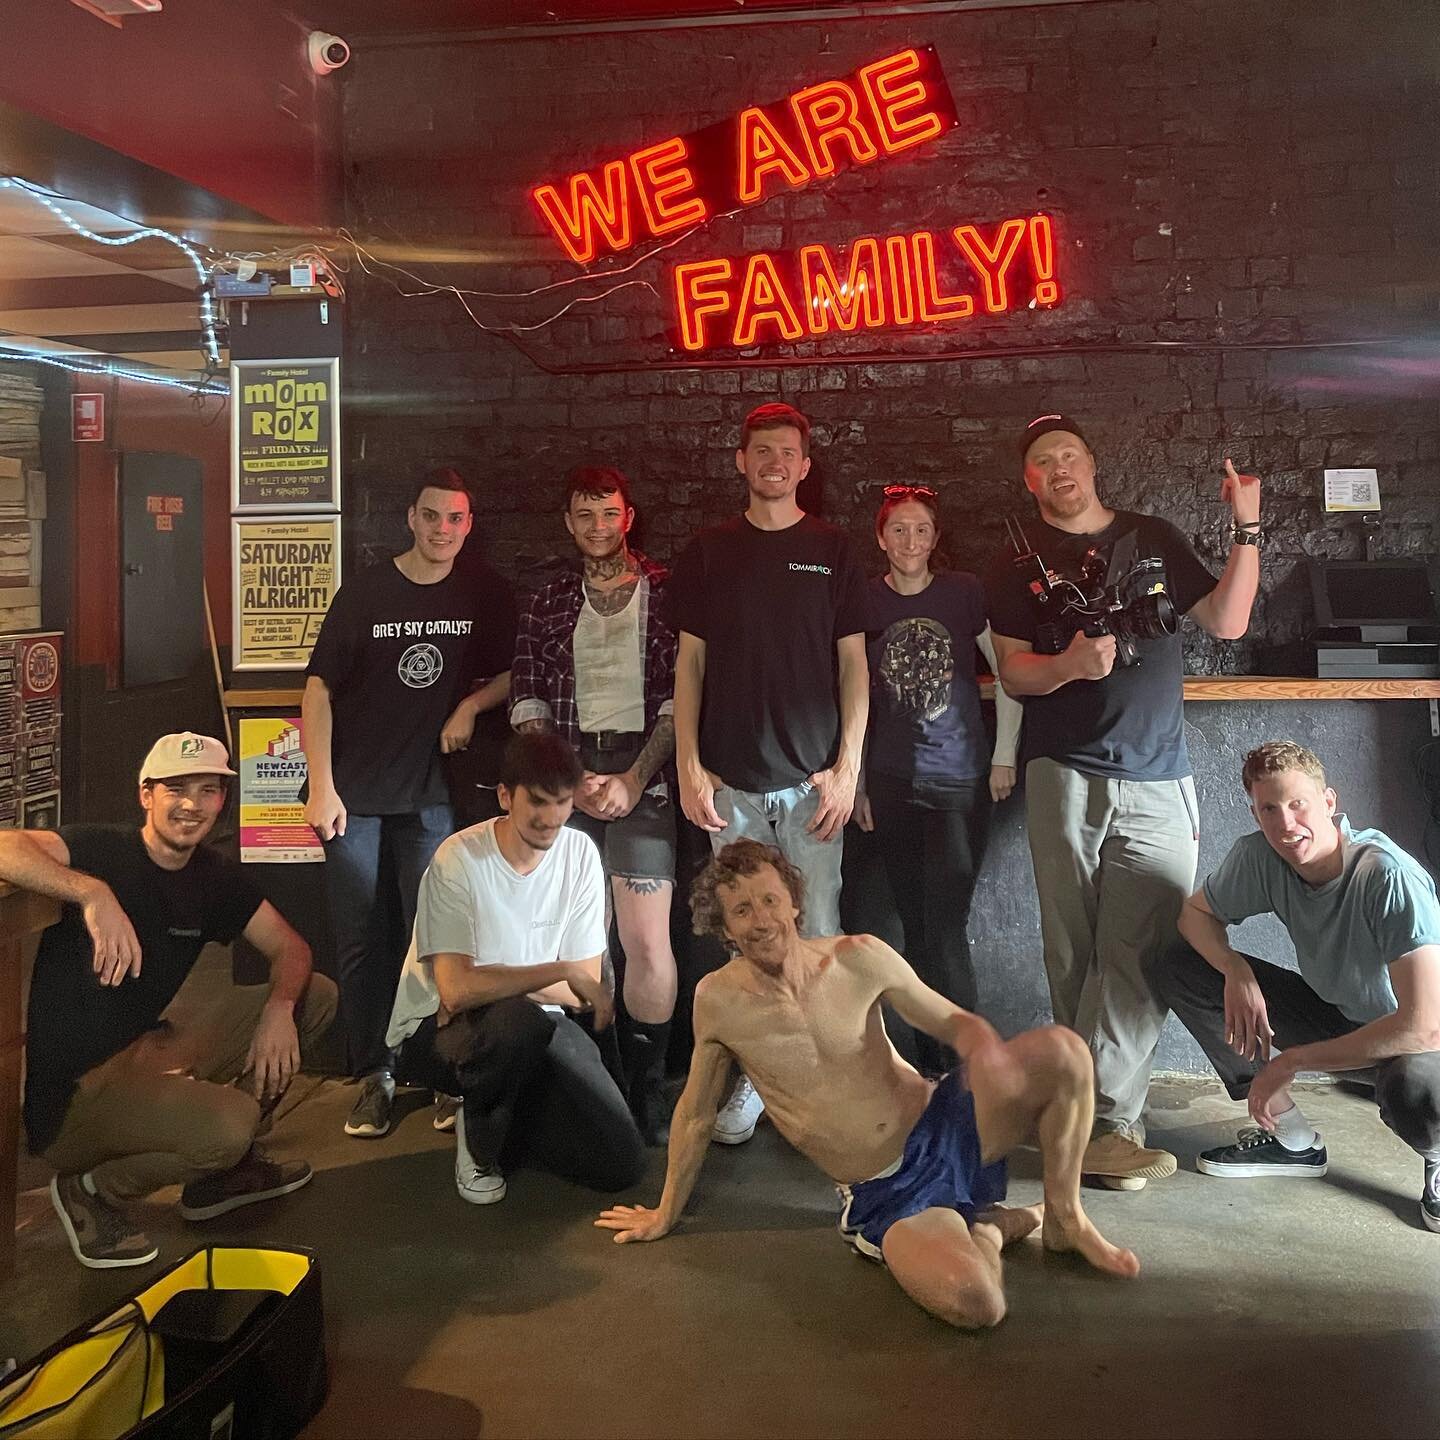 Epic crew shooting the new @lucabrasitassie clip, absolutely loved the hazy vibe and bar straddling Y-front dance moves.
Thank you @nickjsullivan @stevenbarnard00 @tommirock @katetealspicer @linear.wave.sampler @thefamilyhotelnewcastle